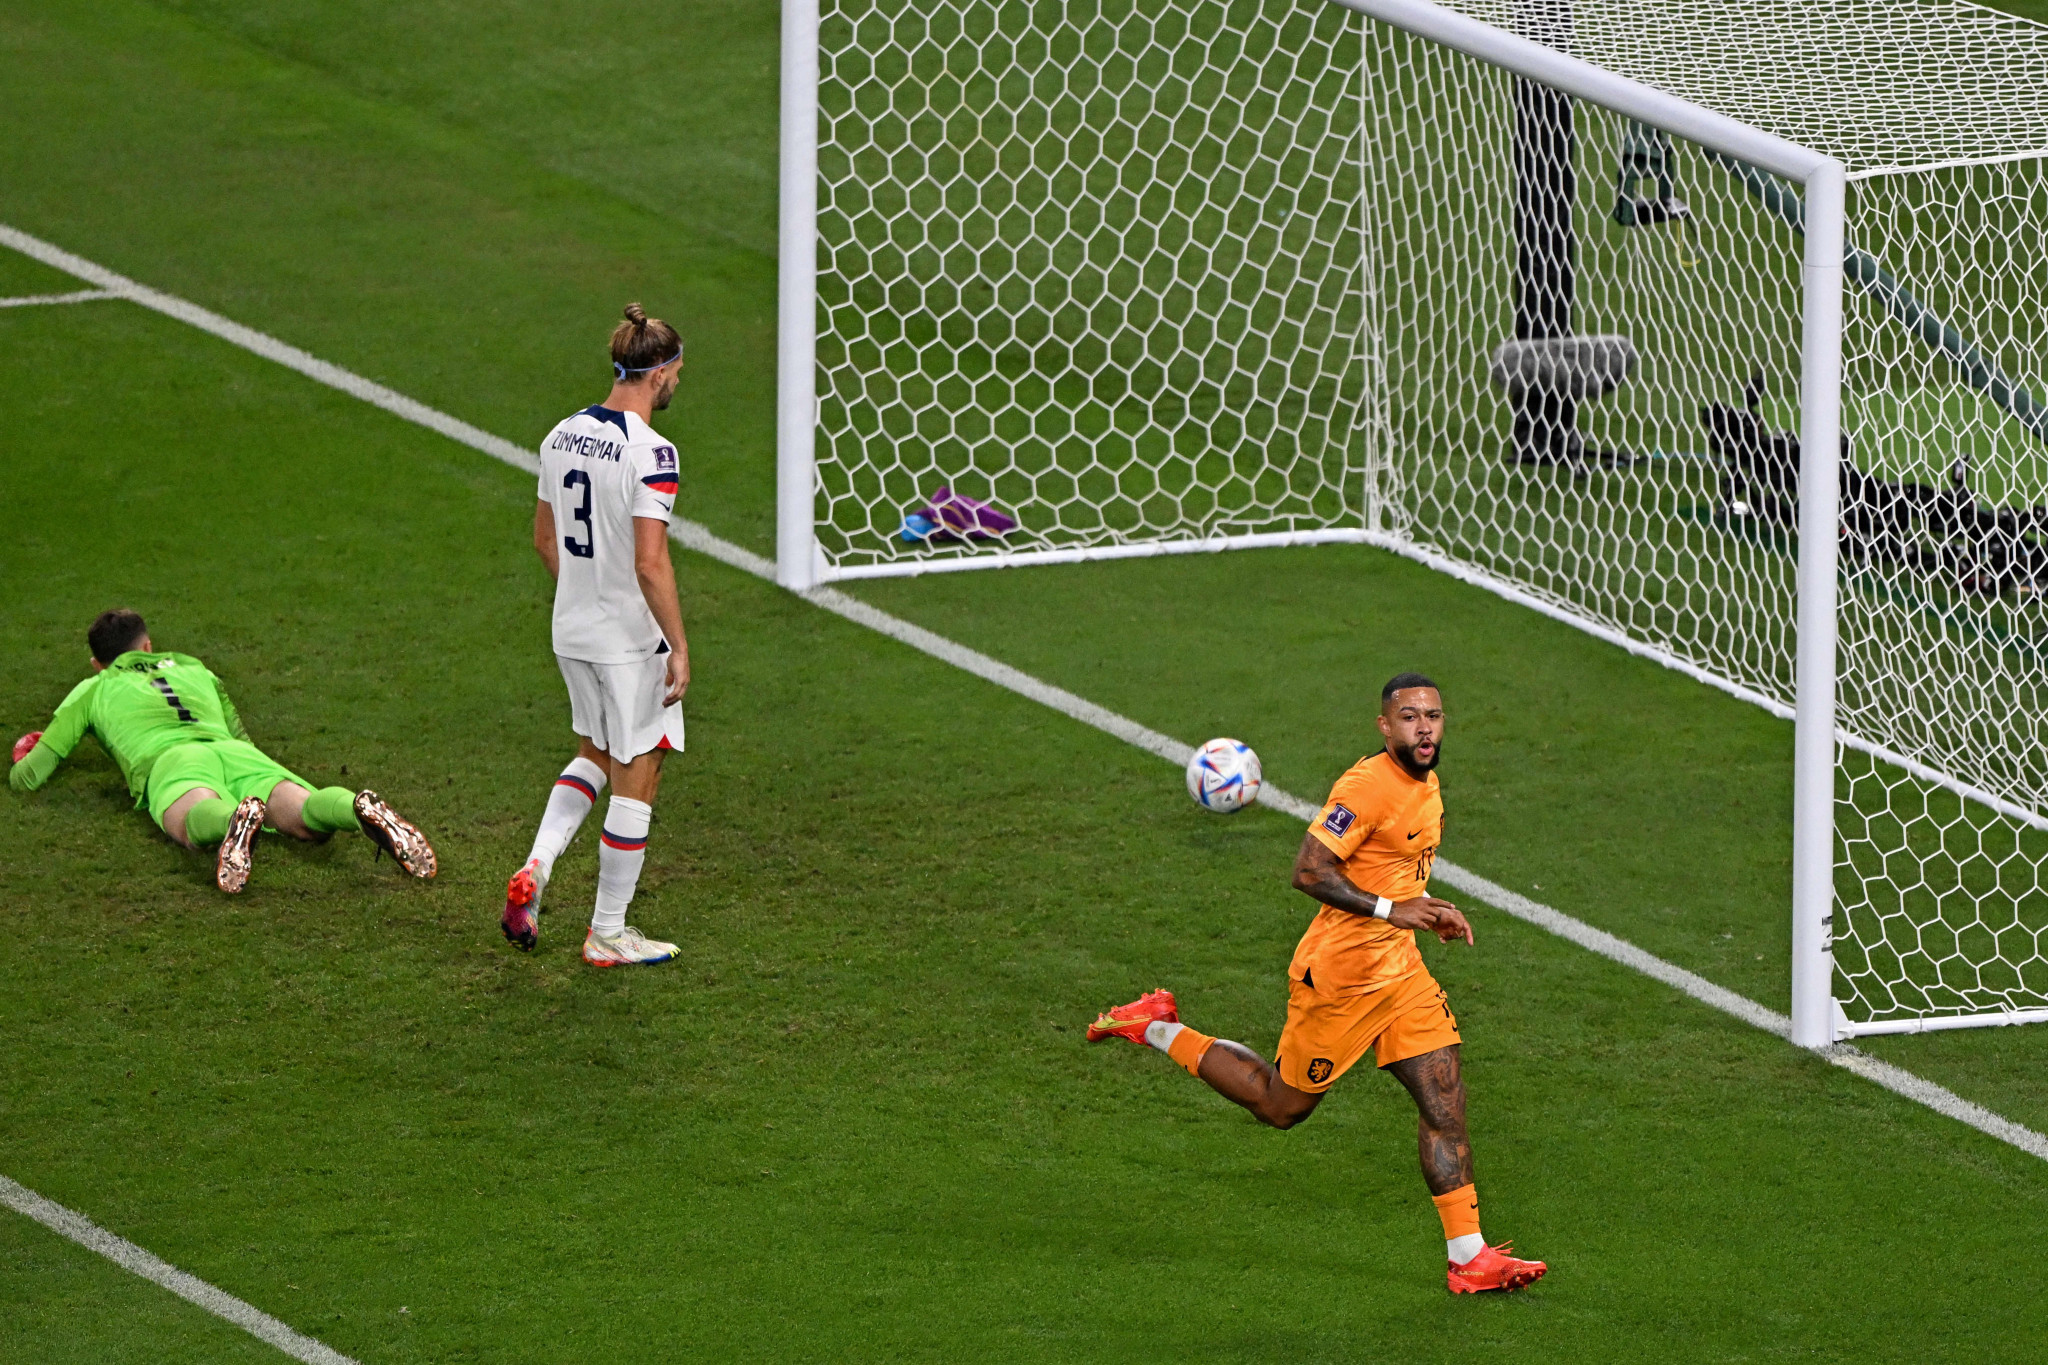 The Netherlands cruise past USA to reach FIFA World Cup quarterfinals